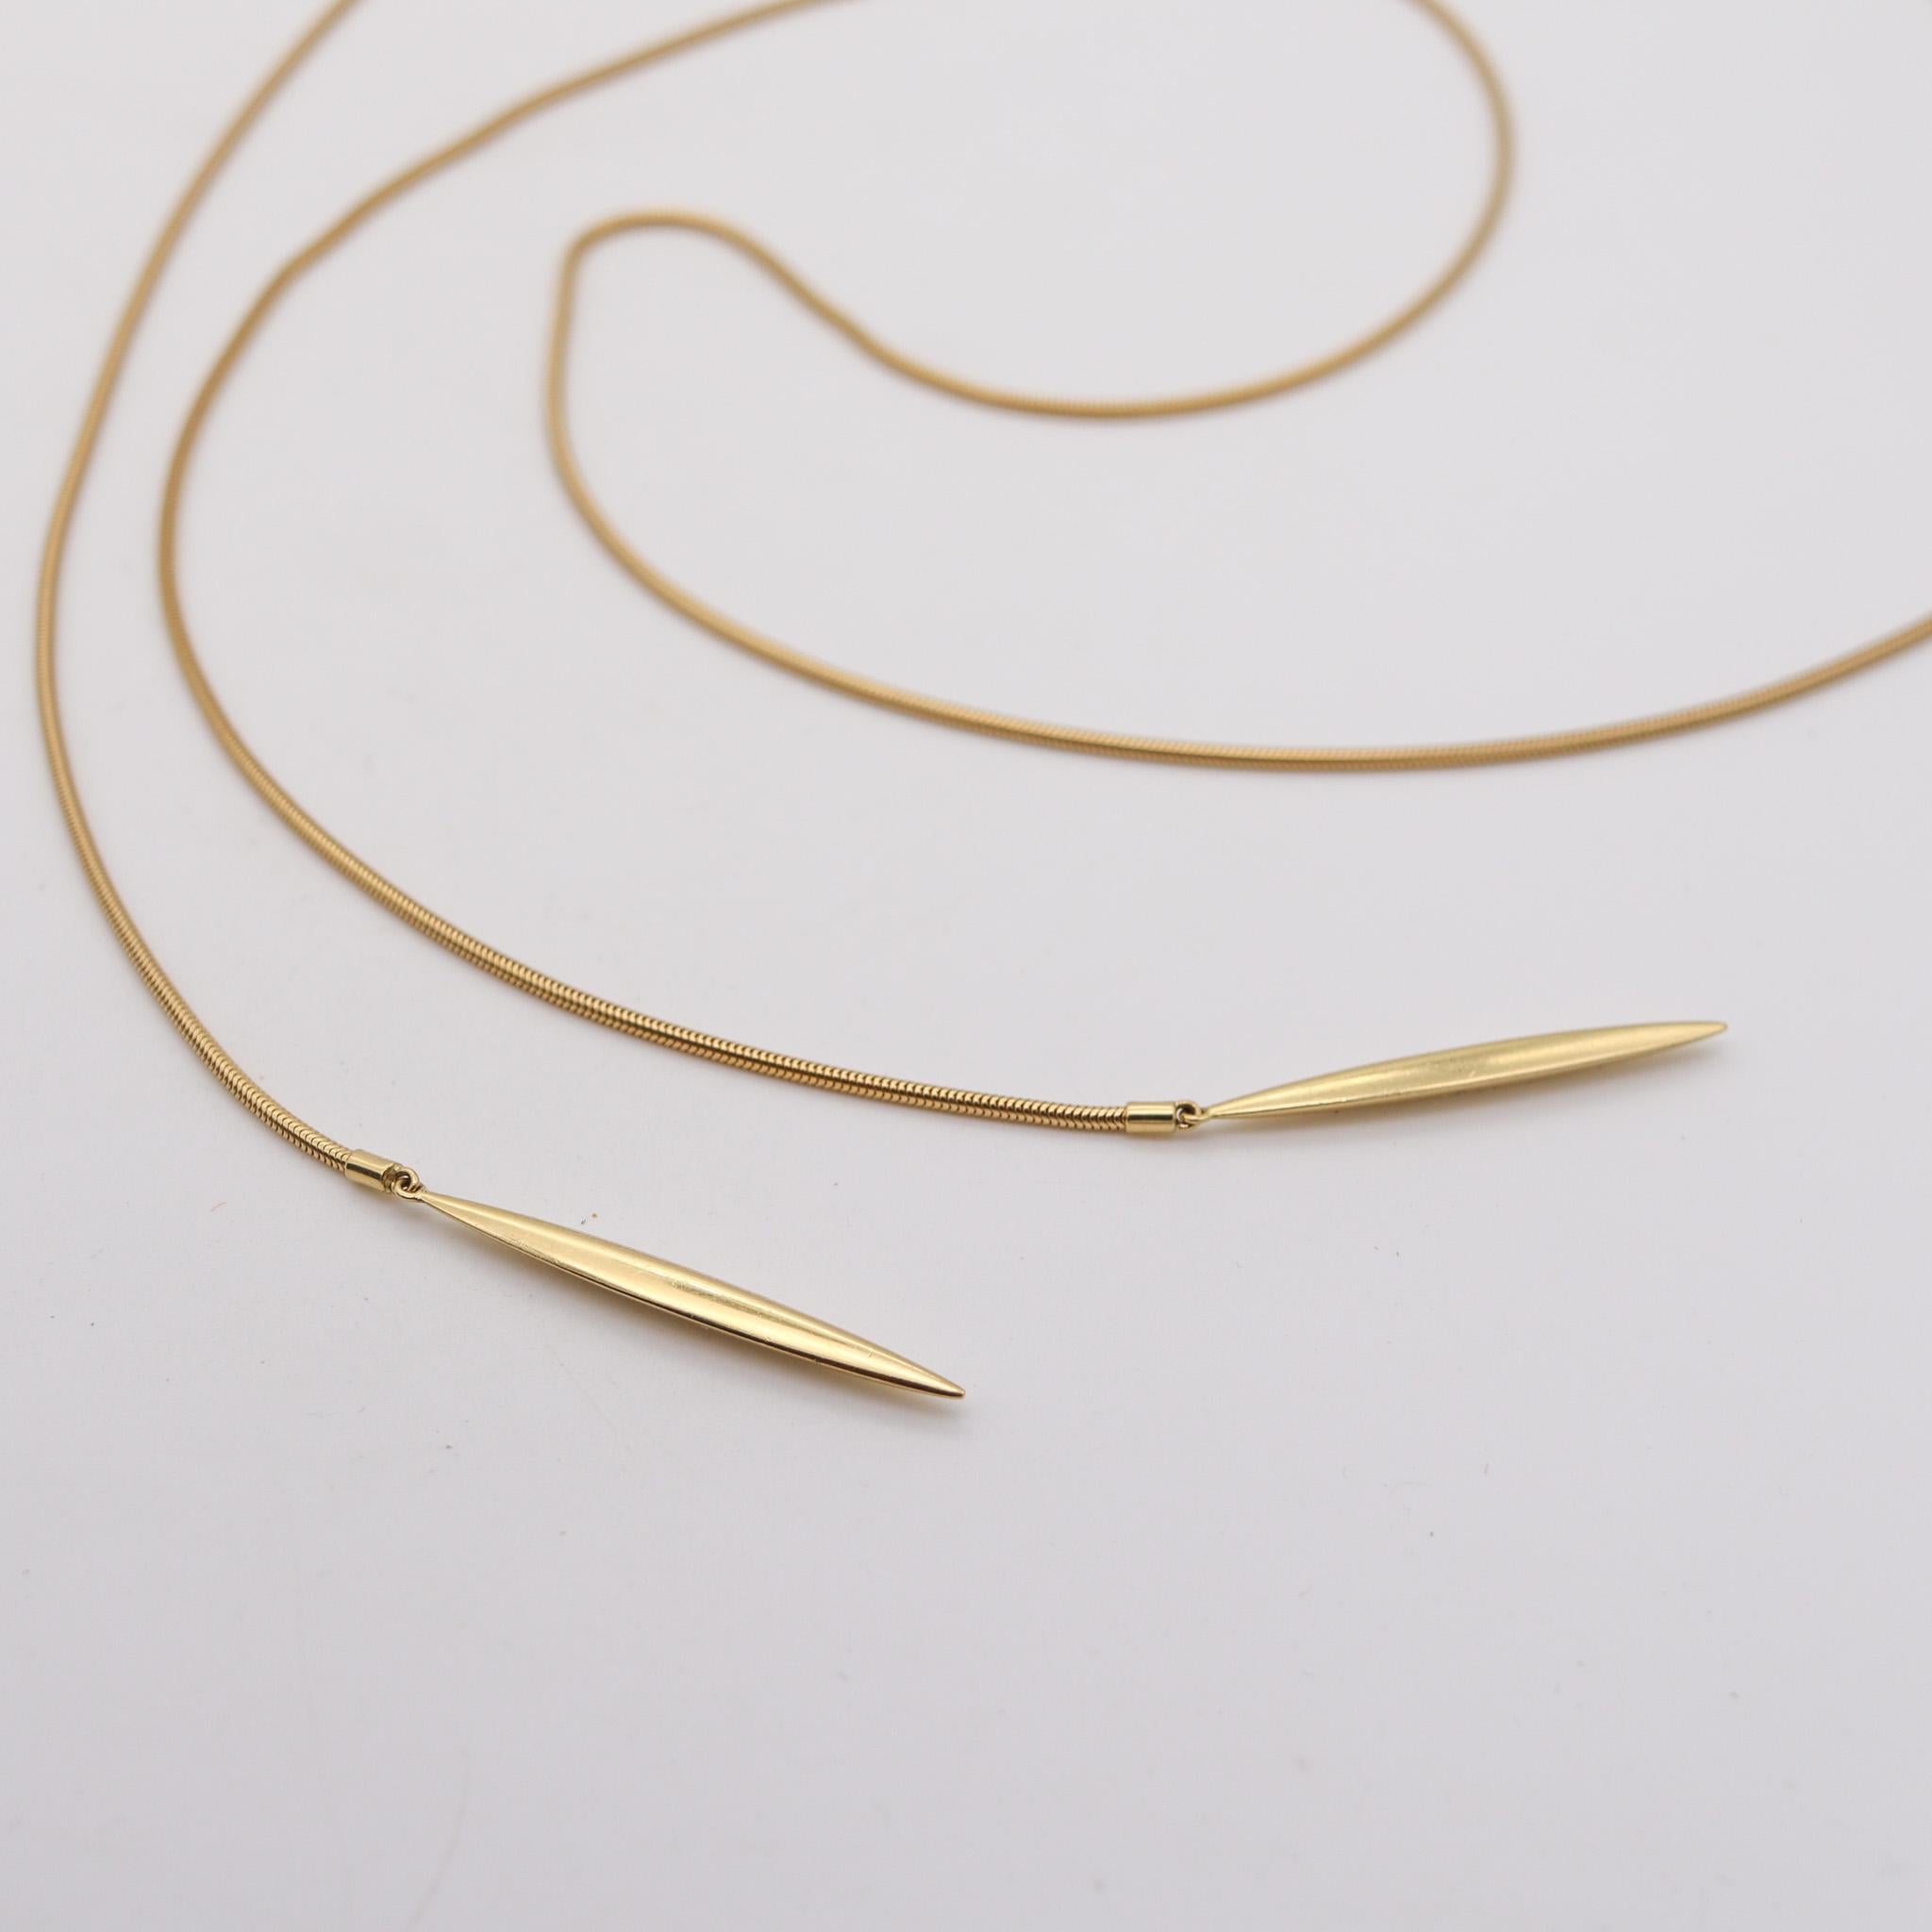 Tiffany & Co. Elegant Long Necklace Lariat in Solid 18Kt Yellow Gold In Excellent Condition For Sale In Miami, FL